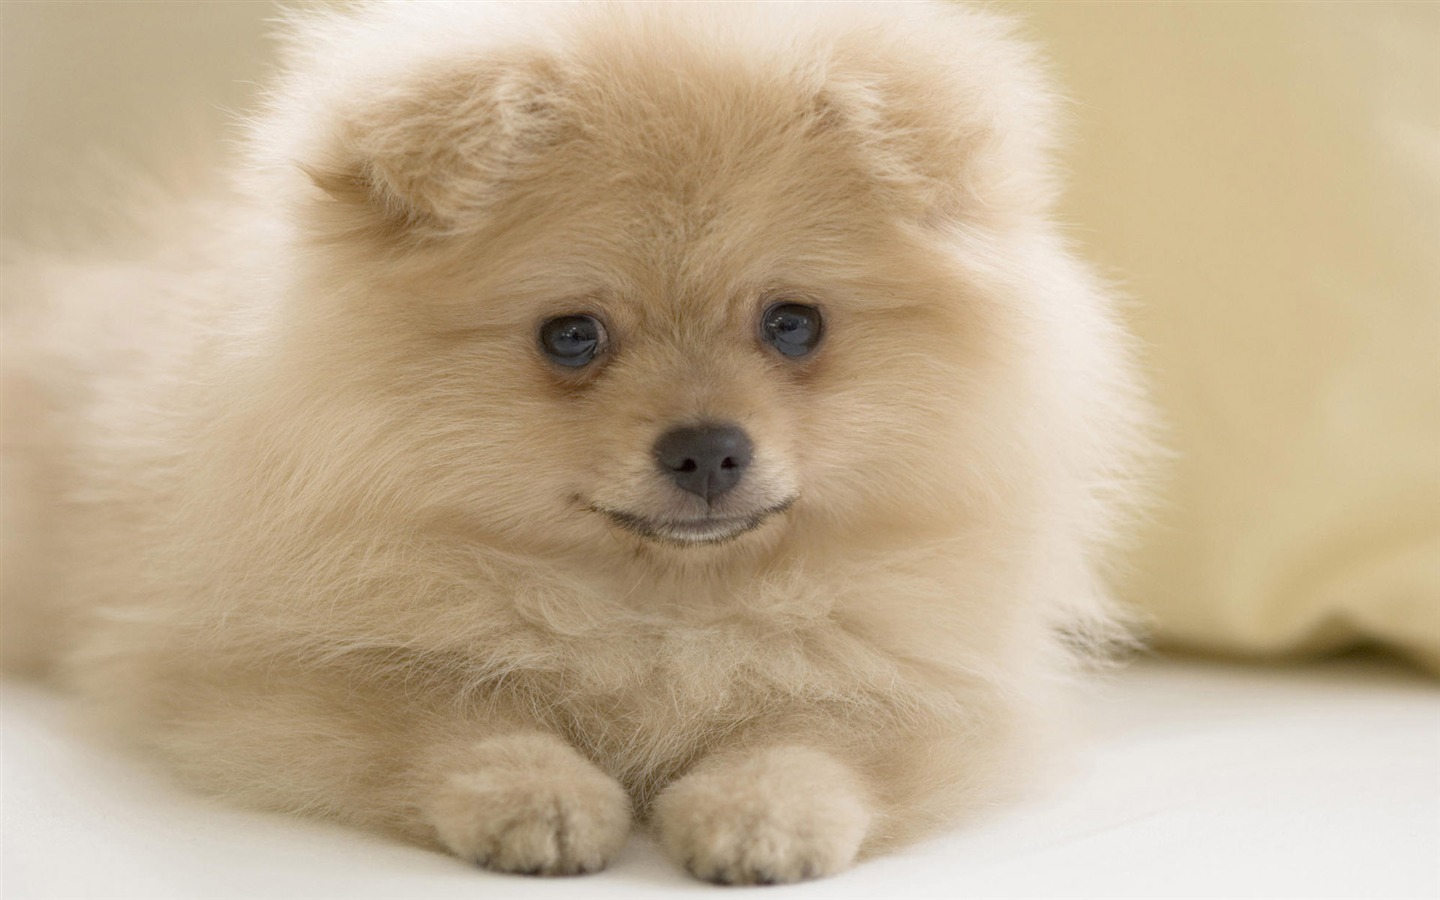 Puppy Photo HD wallpapers (10) #12 - 1440x900